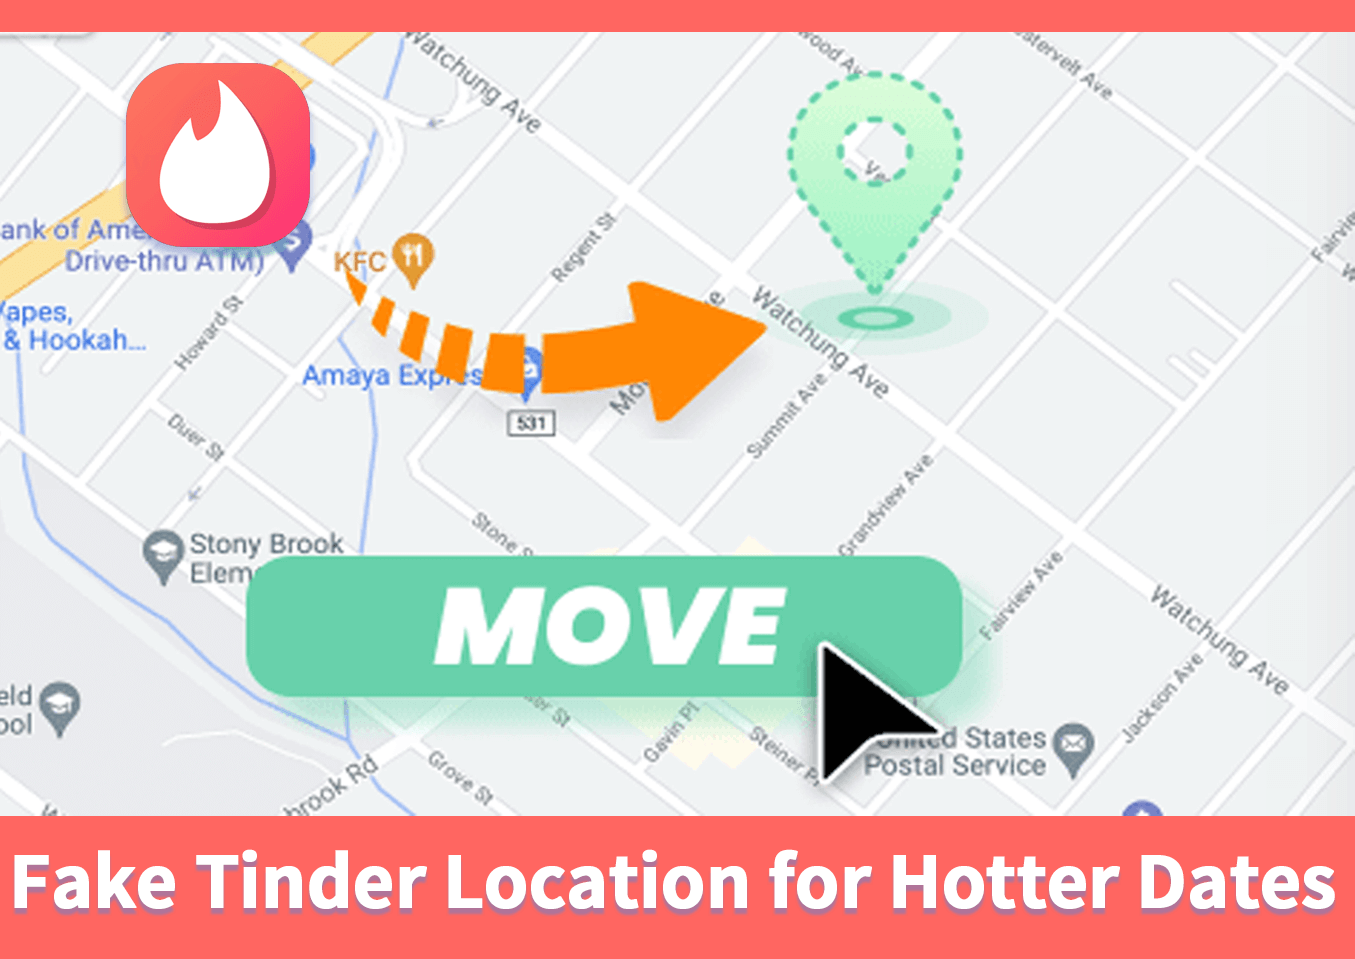 Does tinder distance only updates if perosn use tonder